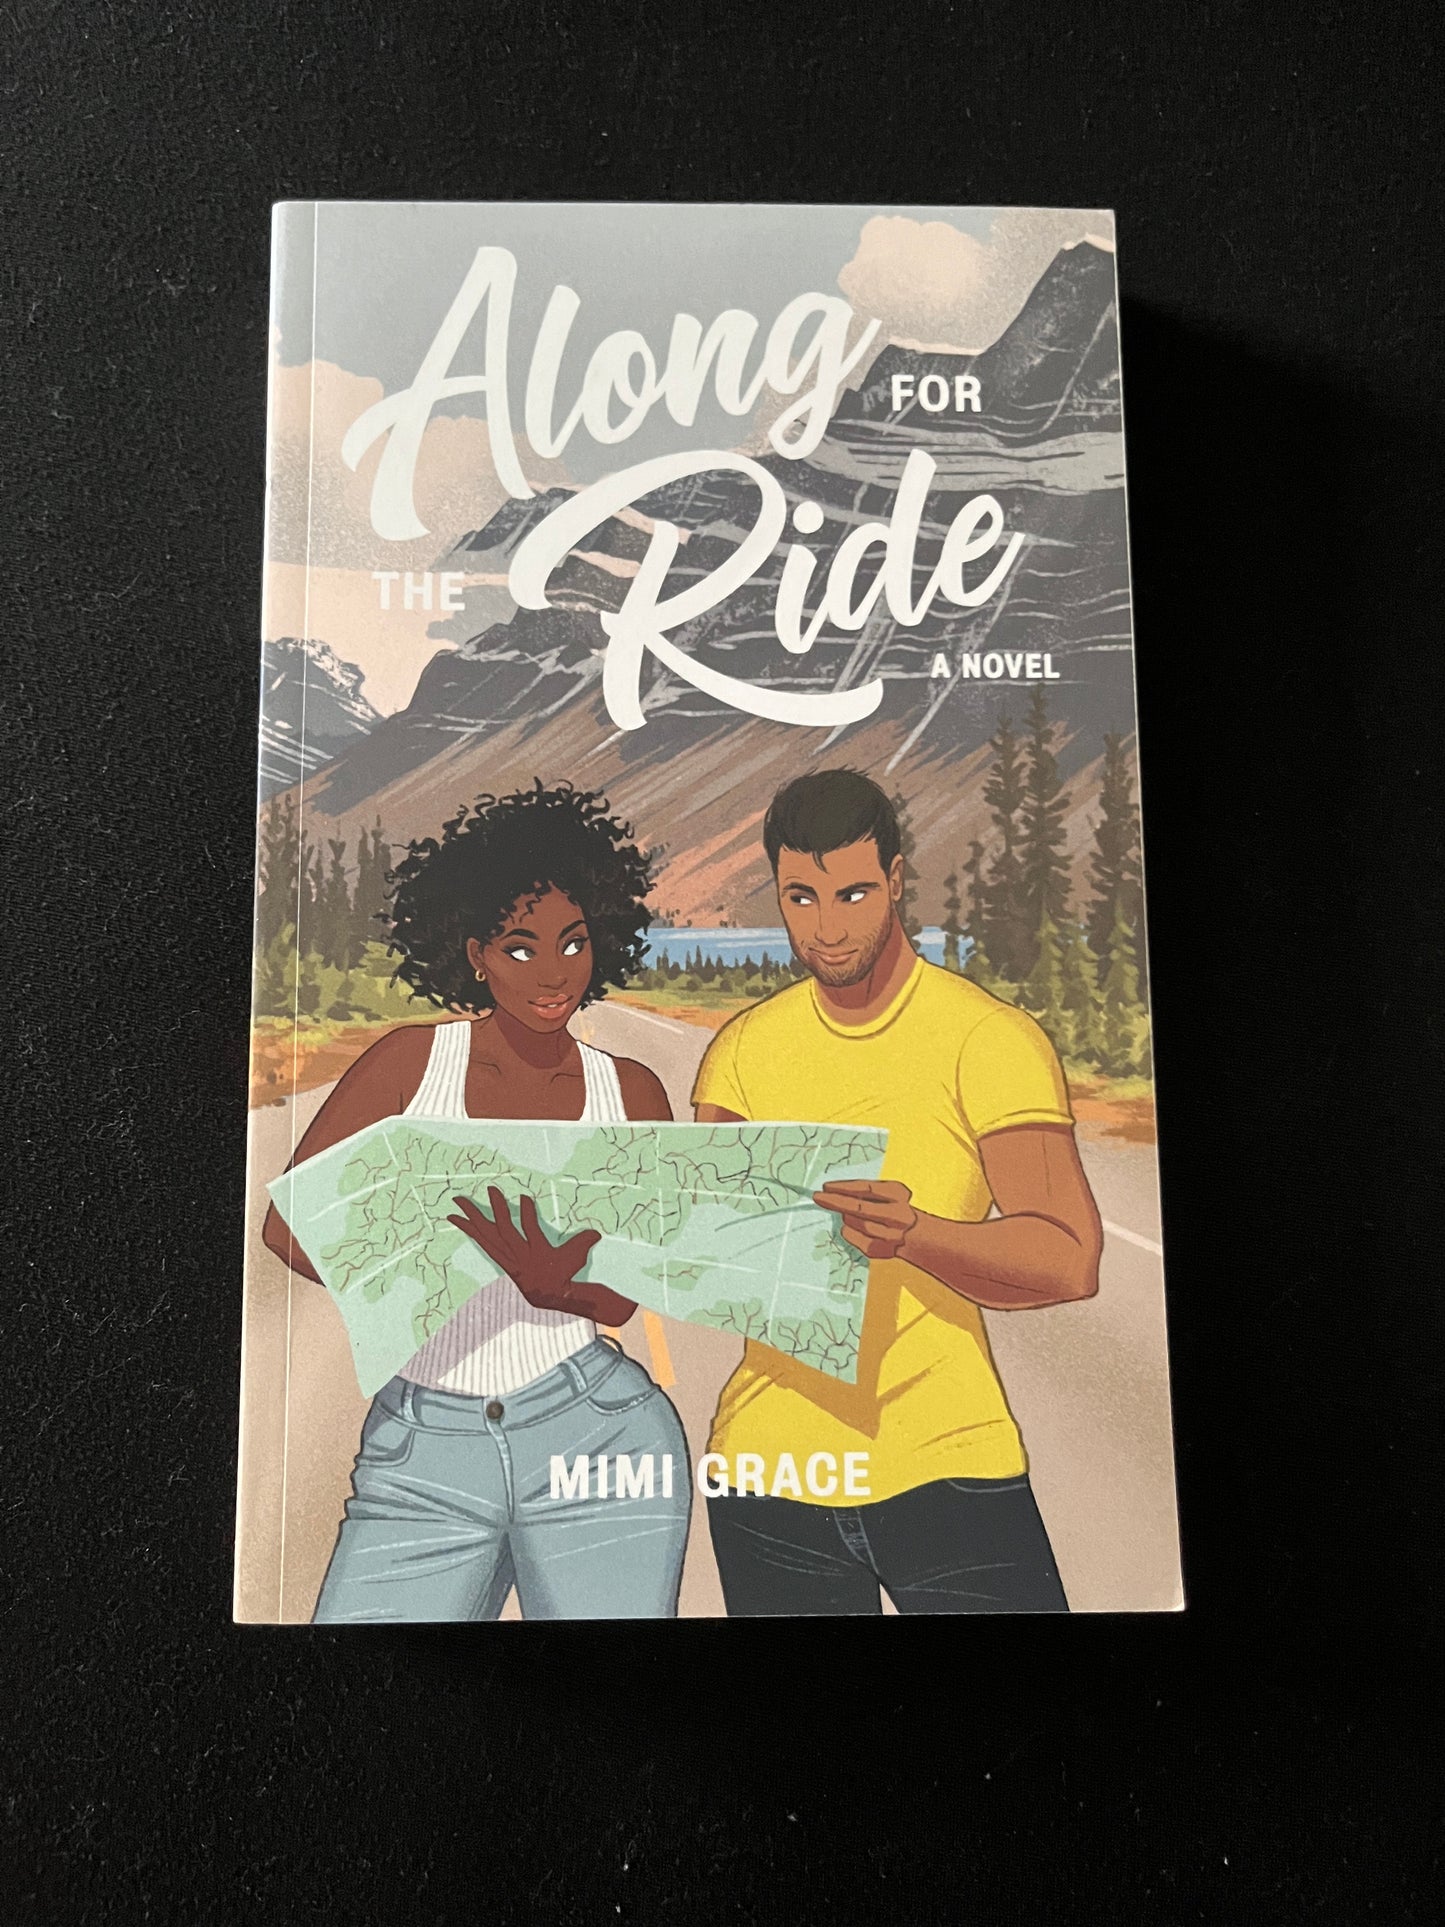 ALONG FOR THE RIDE by Mimi Grace